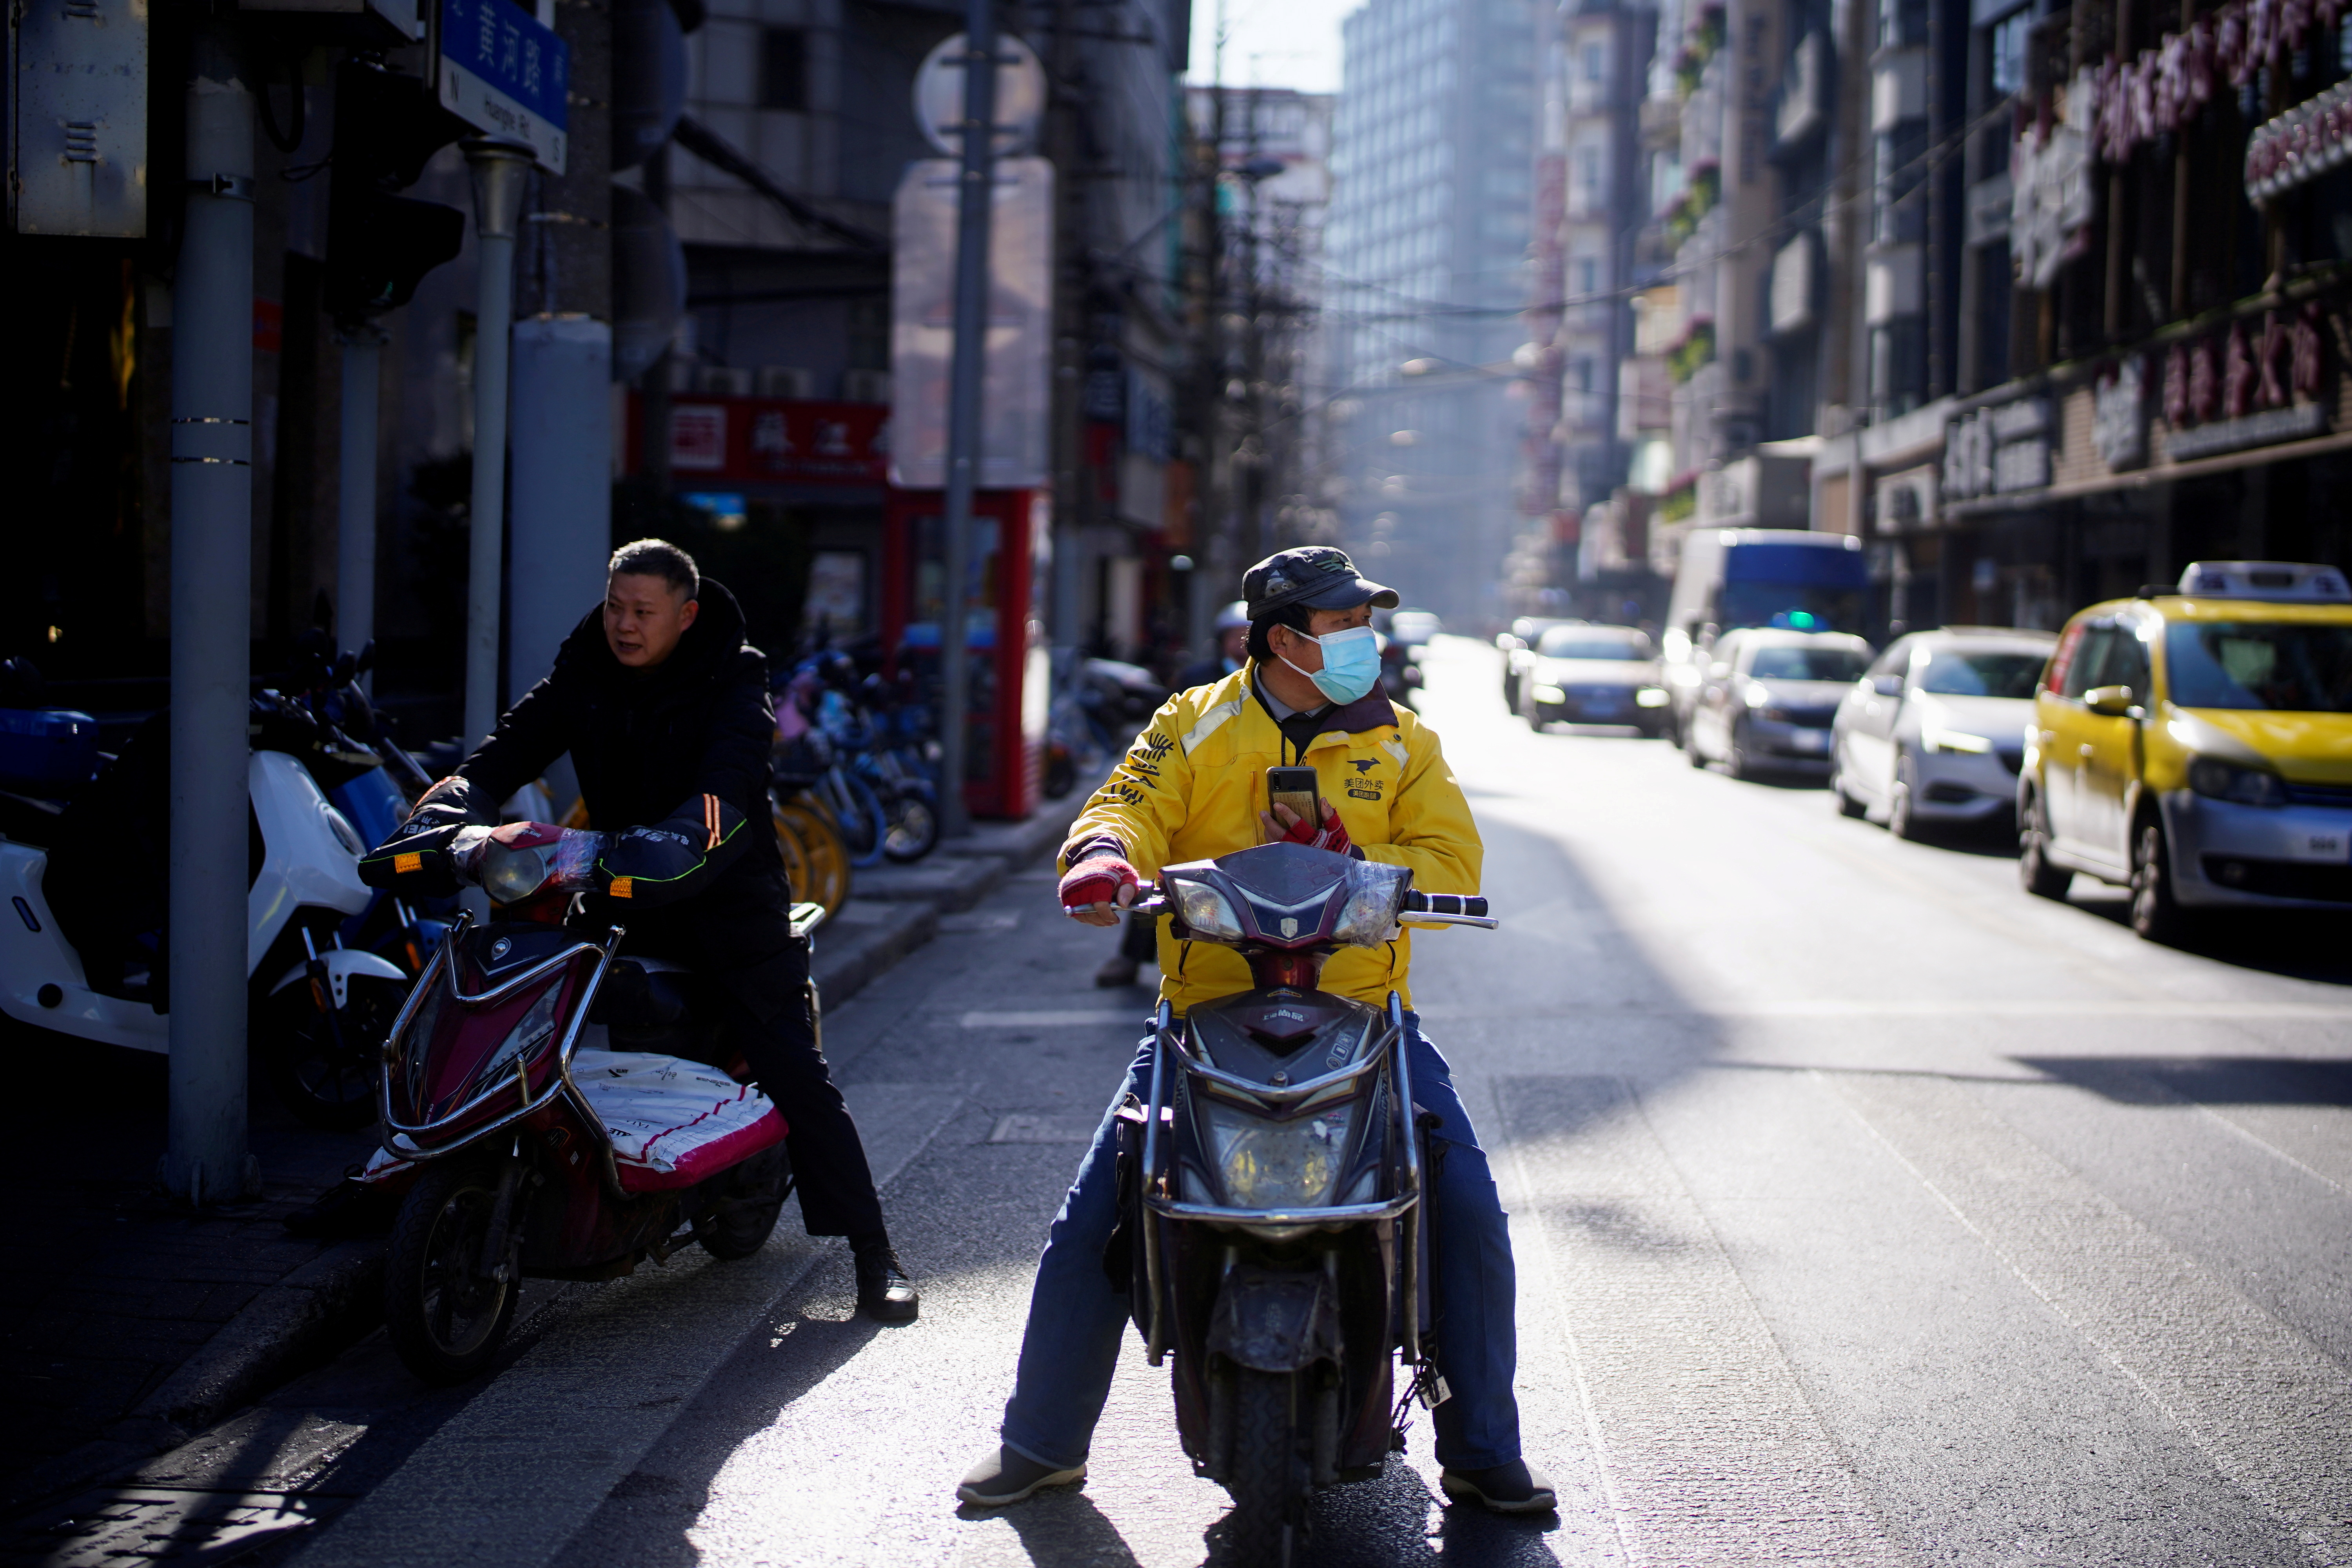 A Meituan delivery worker wearing a face mask is seen on a street following an outbreak of the coronavirus disease (COVID-19) in Shanghai